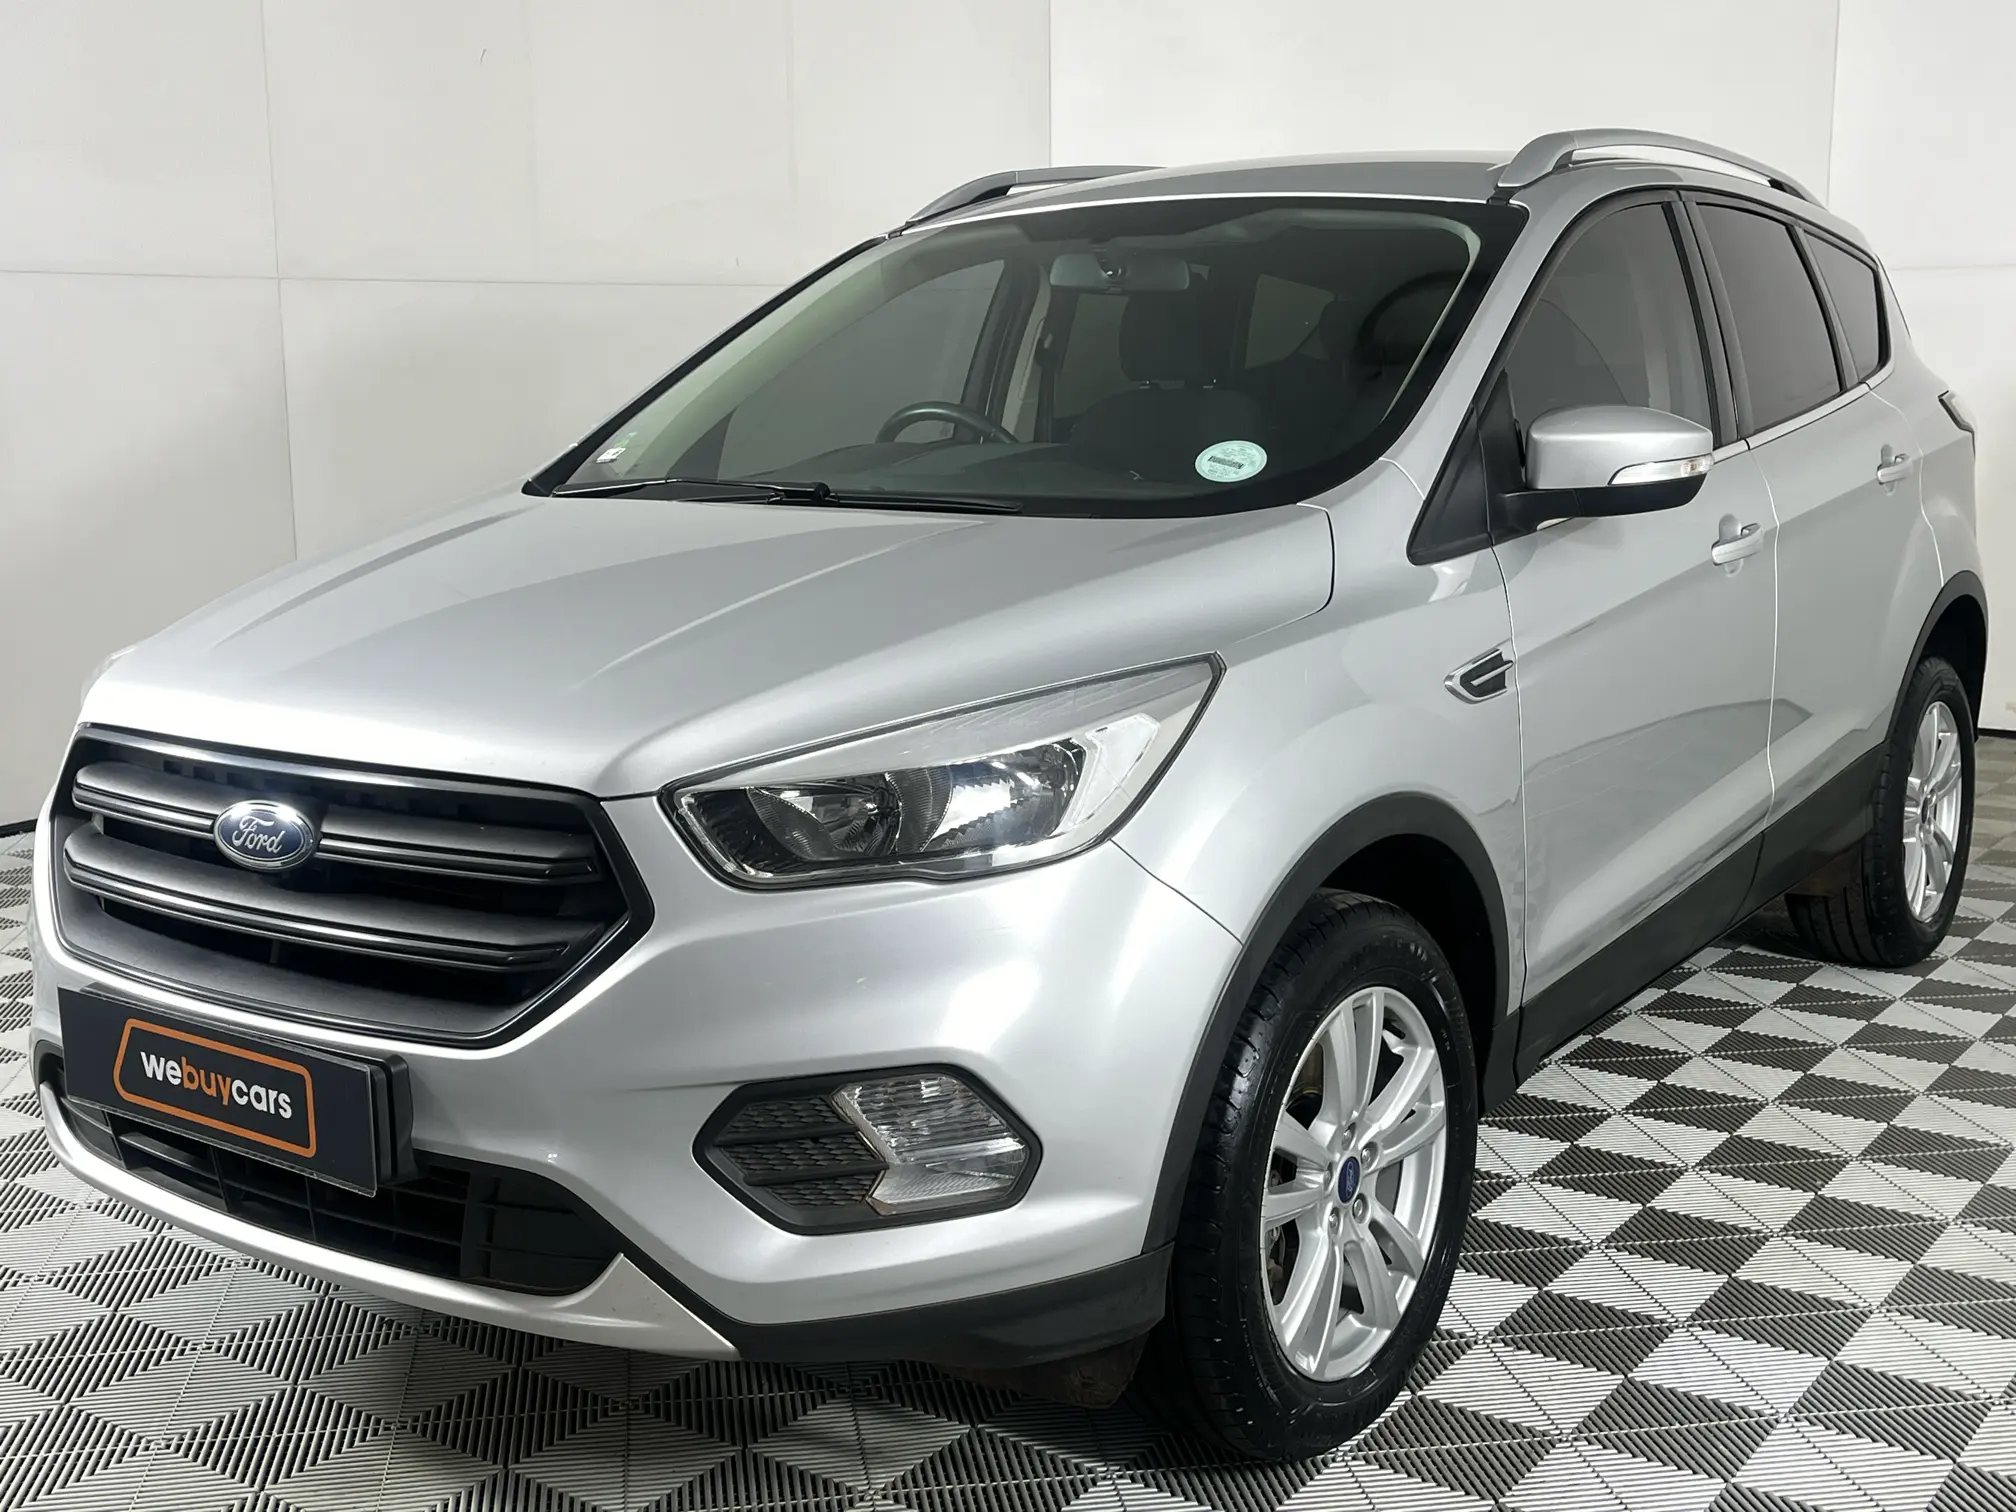 2020 Ford Kuga 1.5 TDCi Ambiente